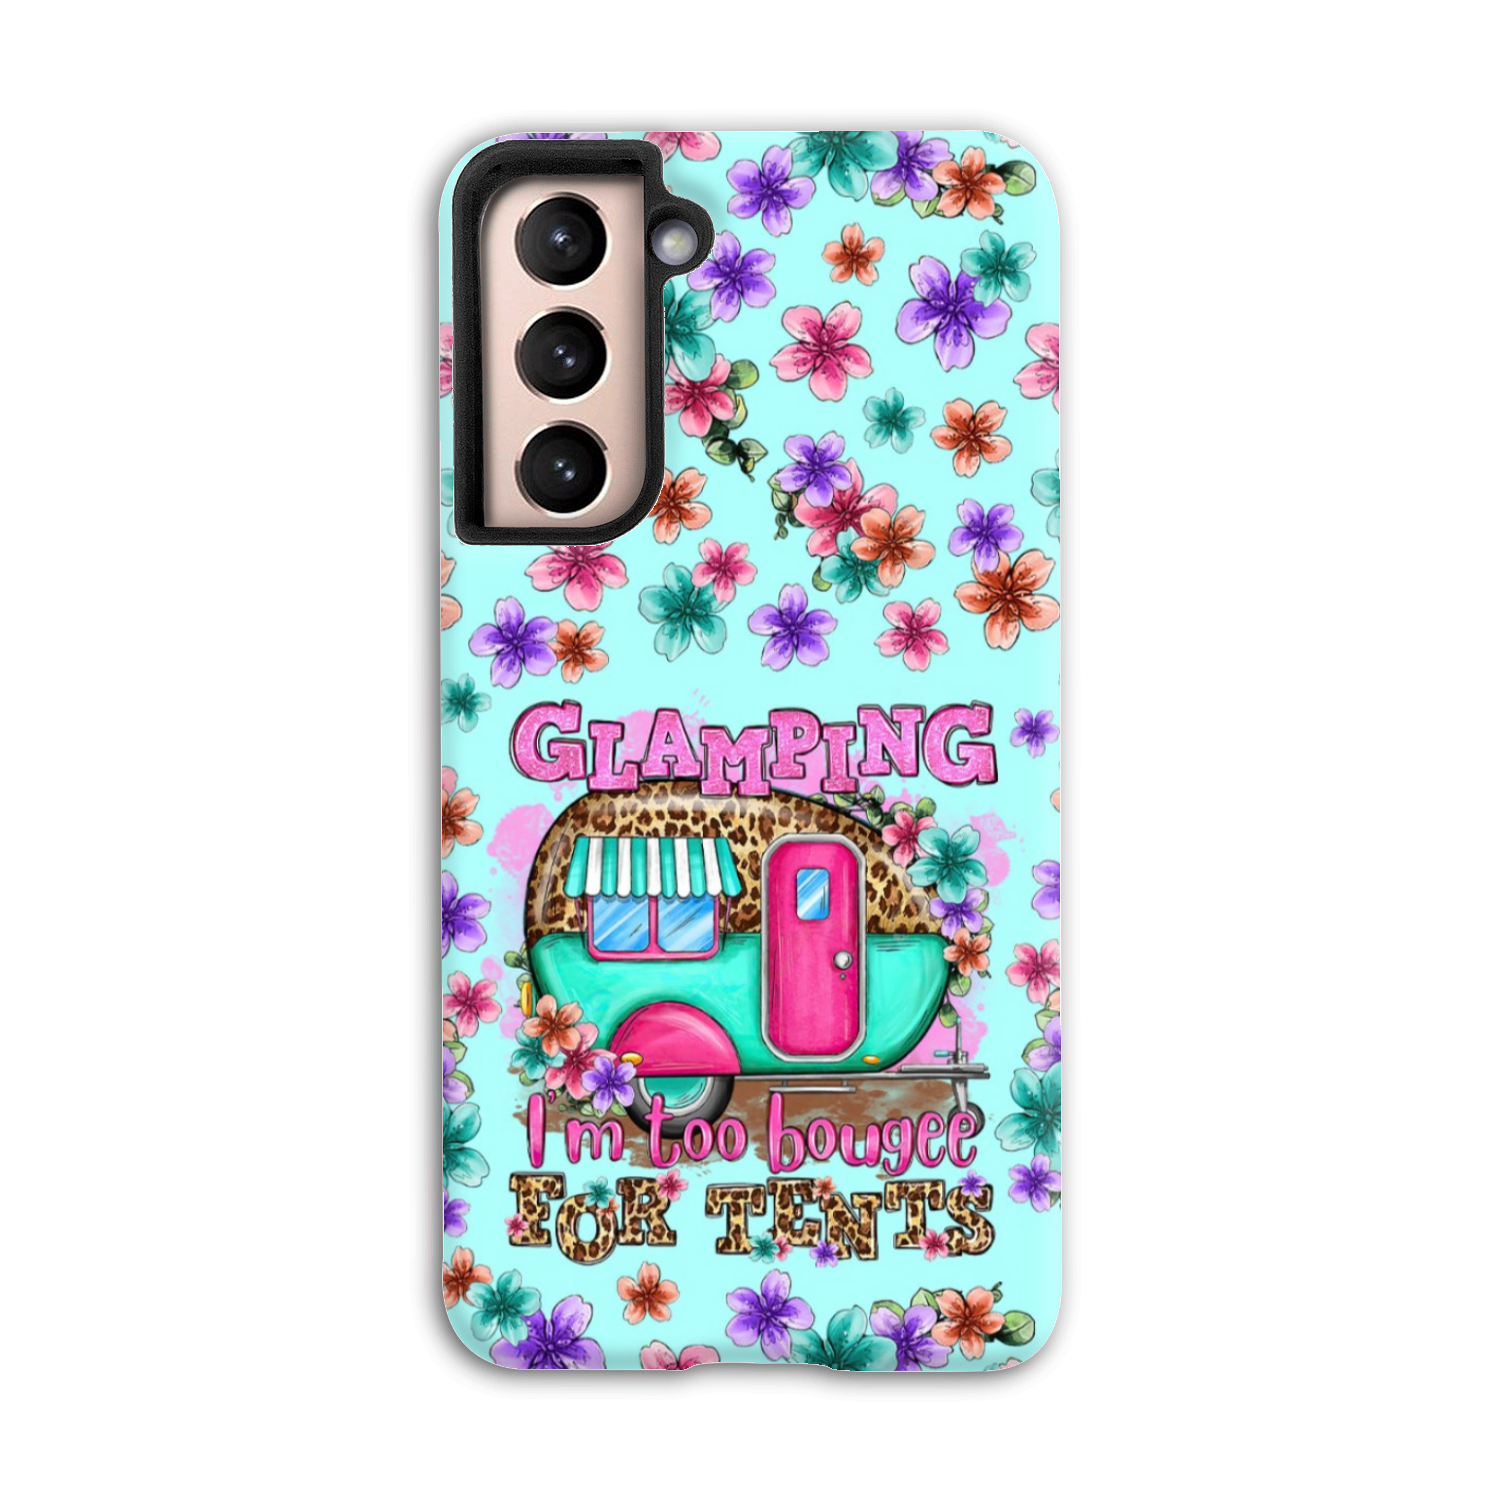 GLAMPING I'M TO BOUGEE PHONE CASE - TLTR1906236